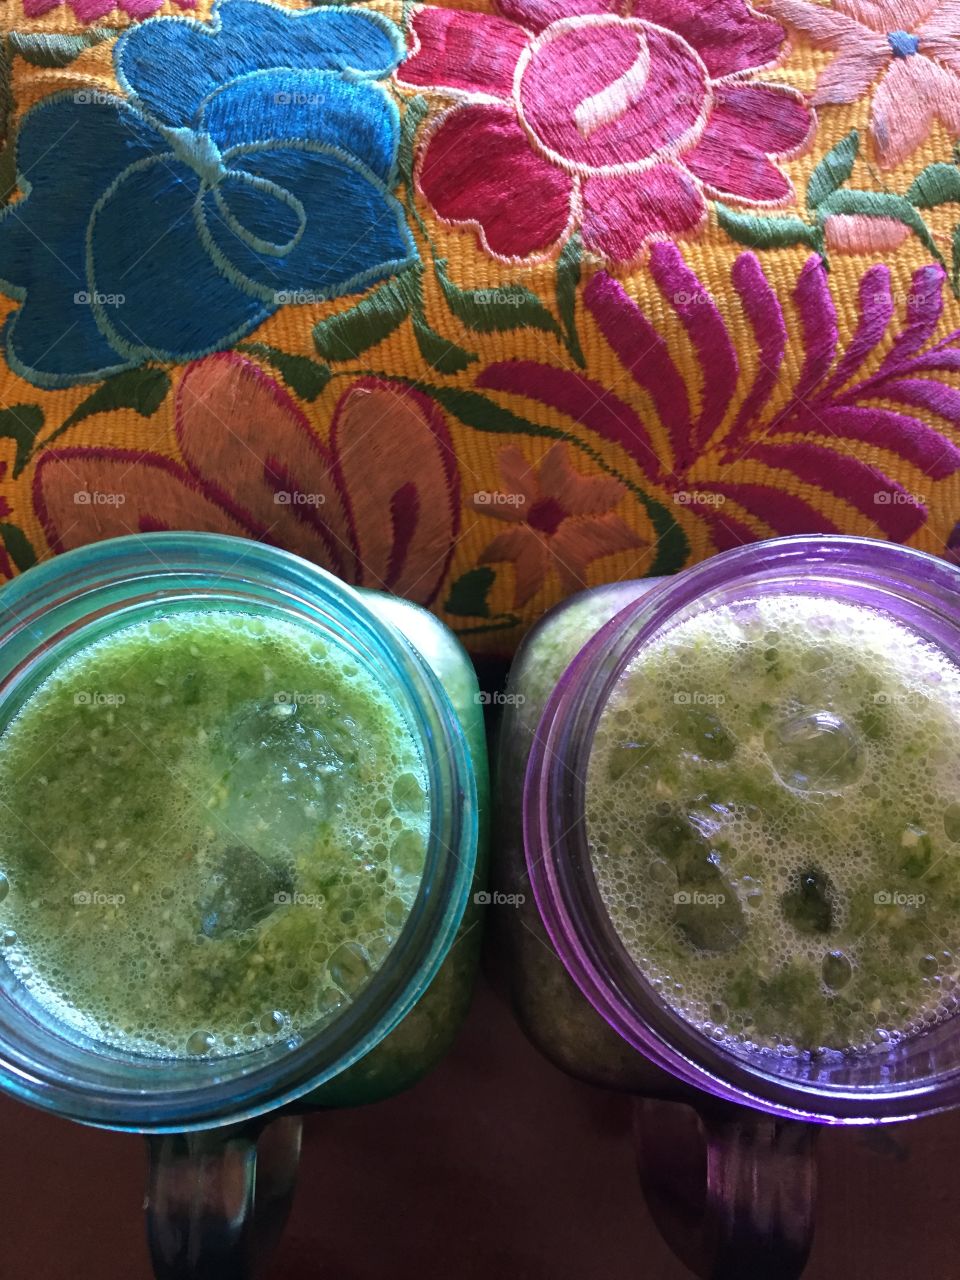 Green juice and flowers / jugo verde con flores 